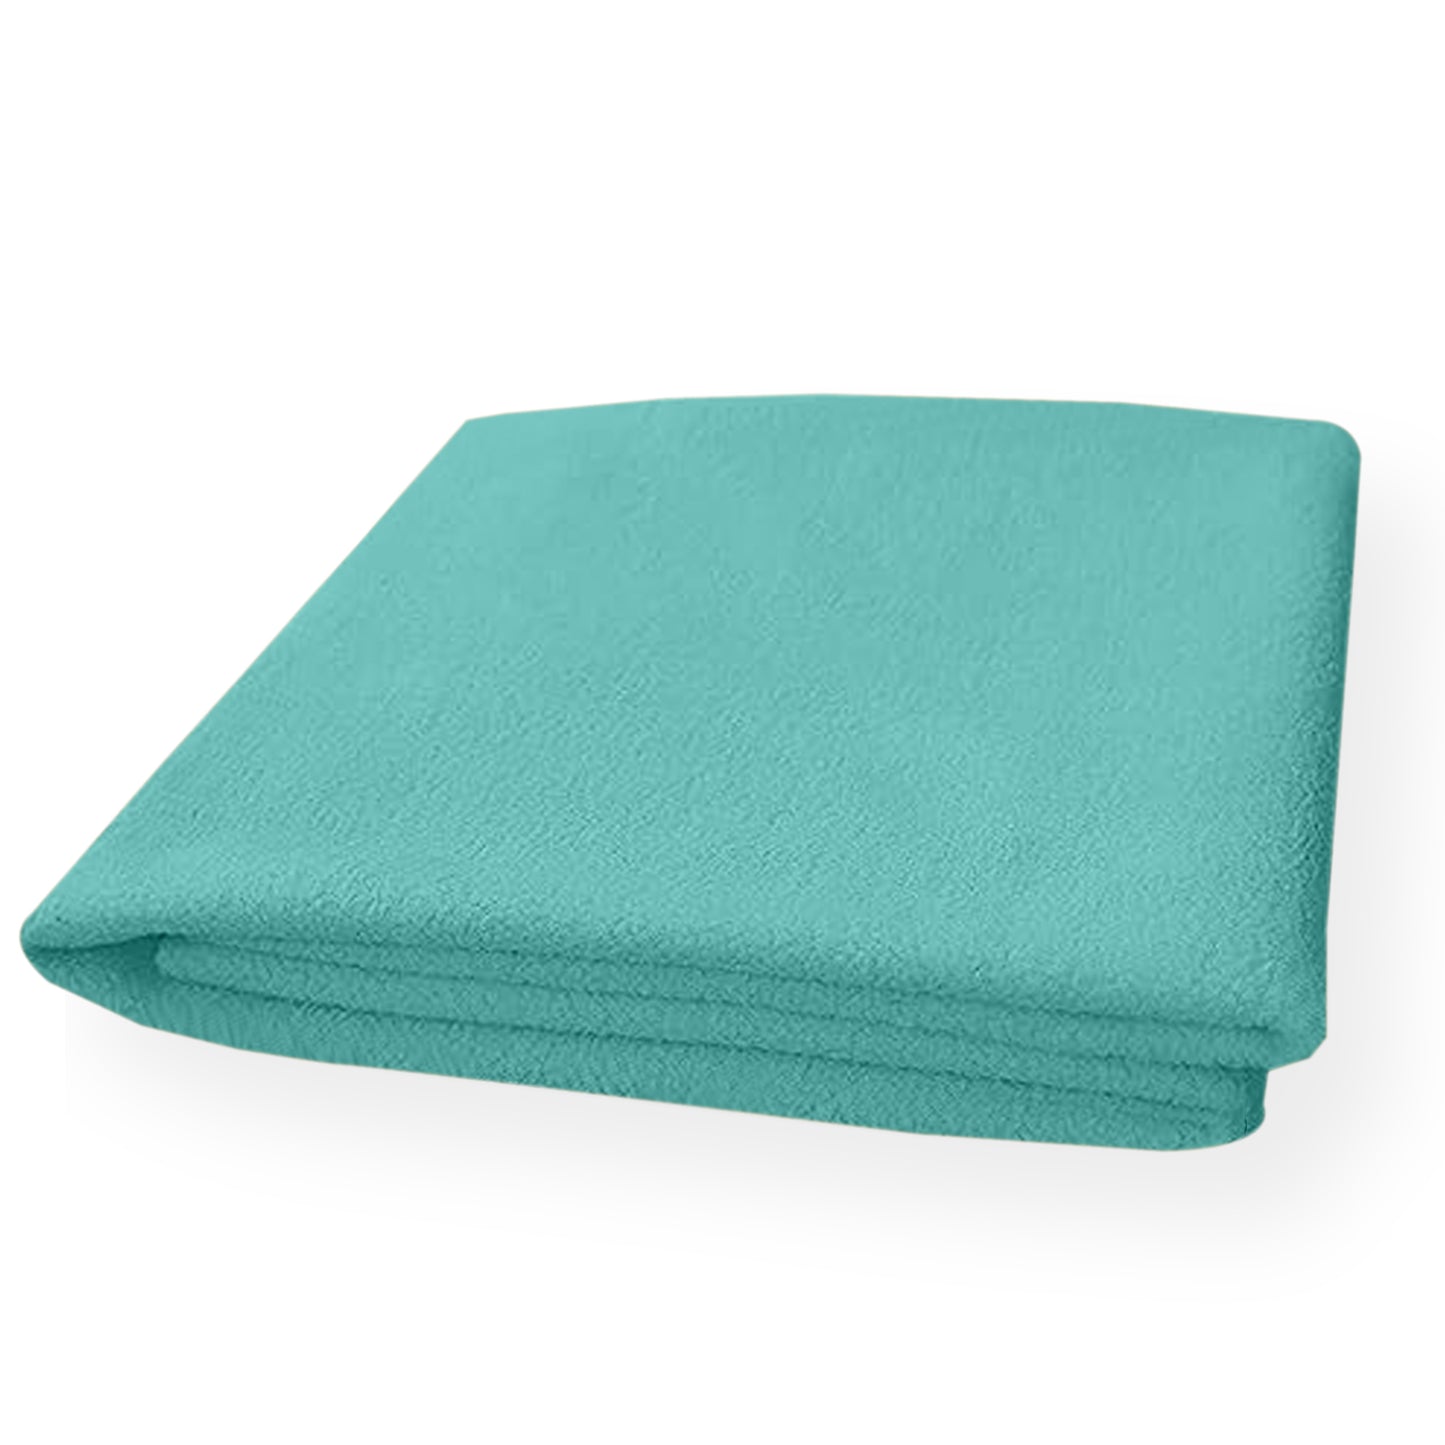 Waterproof Bed Protector, Extra Absorbent Quick Dry Sheet, Baby Bed Protector, Small Size(70 X 50 CM), Pack of 2 -BABY BLUE